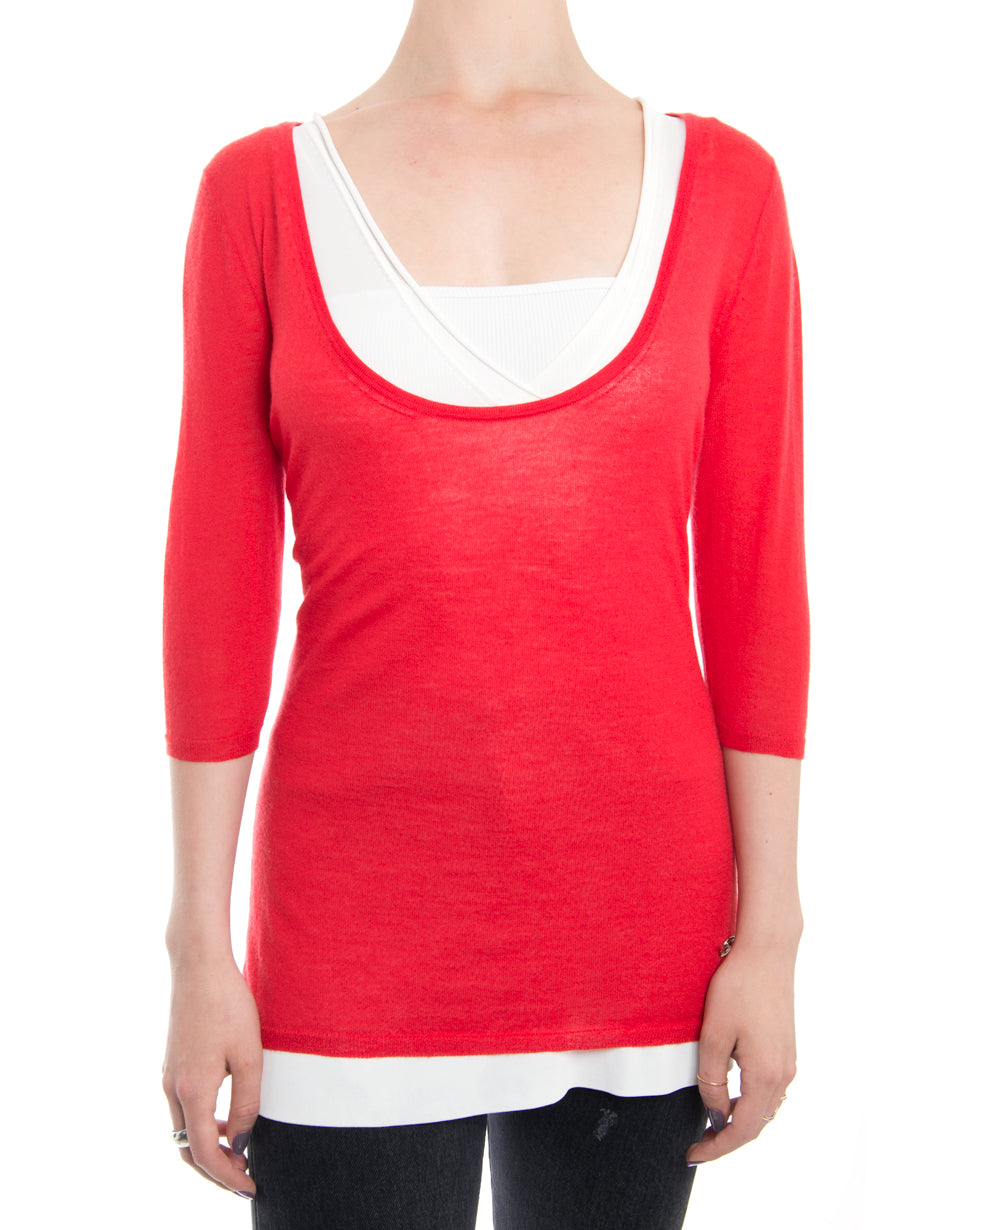 Gucci Red Cashmere Sweater with White Layered Tank - L